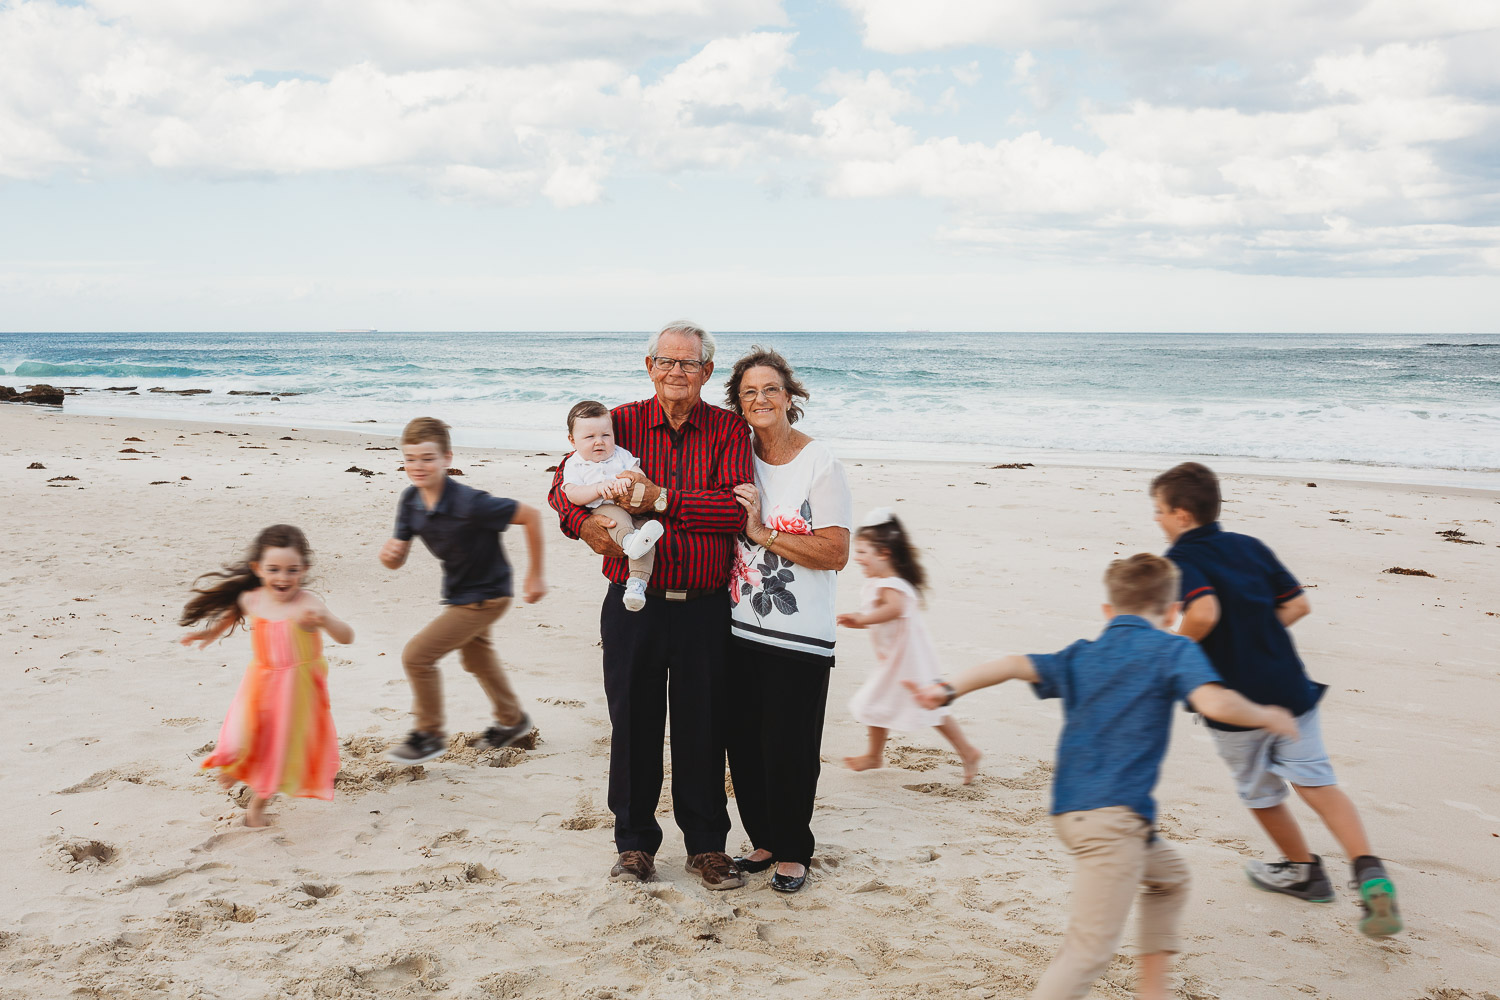 Grandparents in the middle in focus holding baby while grandkids are blurred running around them